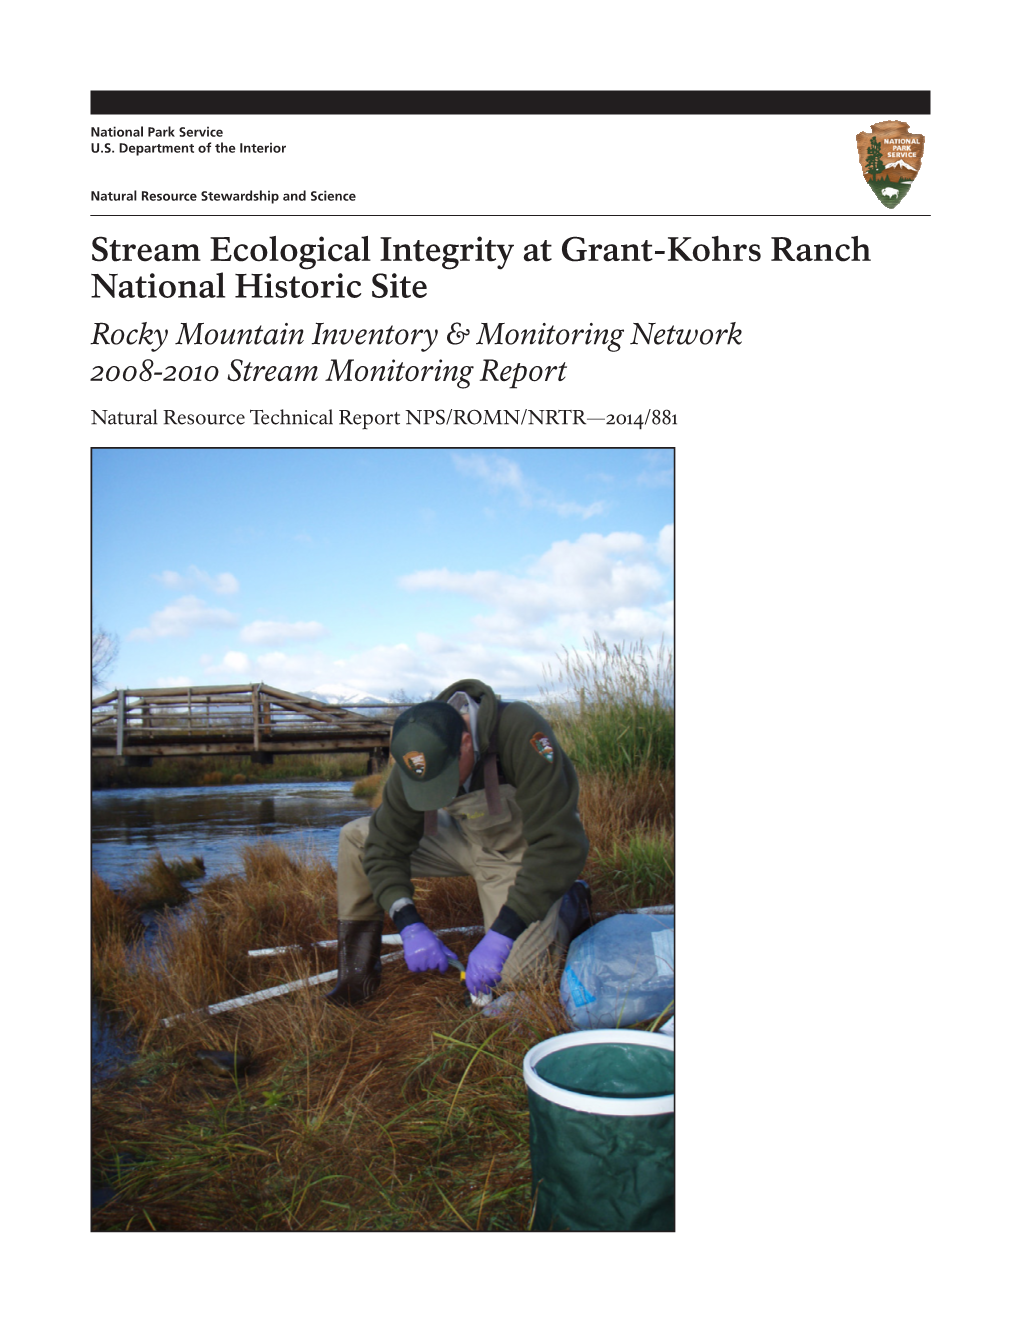 Stream Ecological Integrity at Grant-Kohrs Ranch National Historic Site Rocky Mountain Inventory & Monitoring Network 2008-2010 Stream Monitoring Report